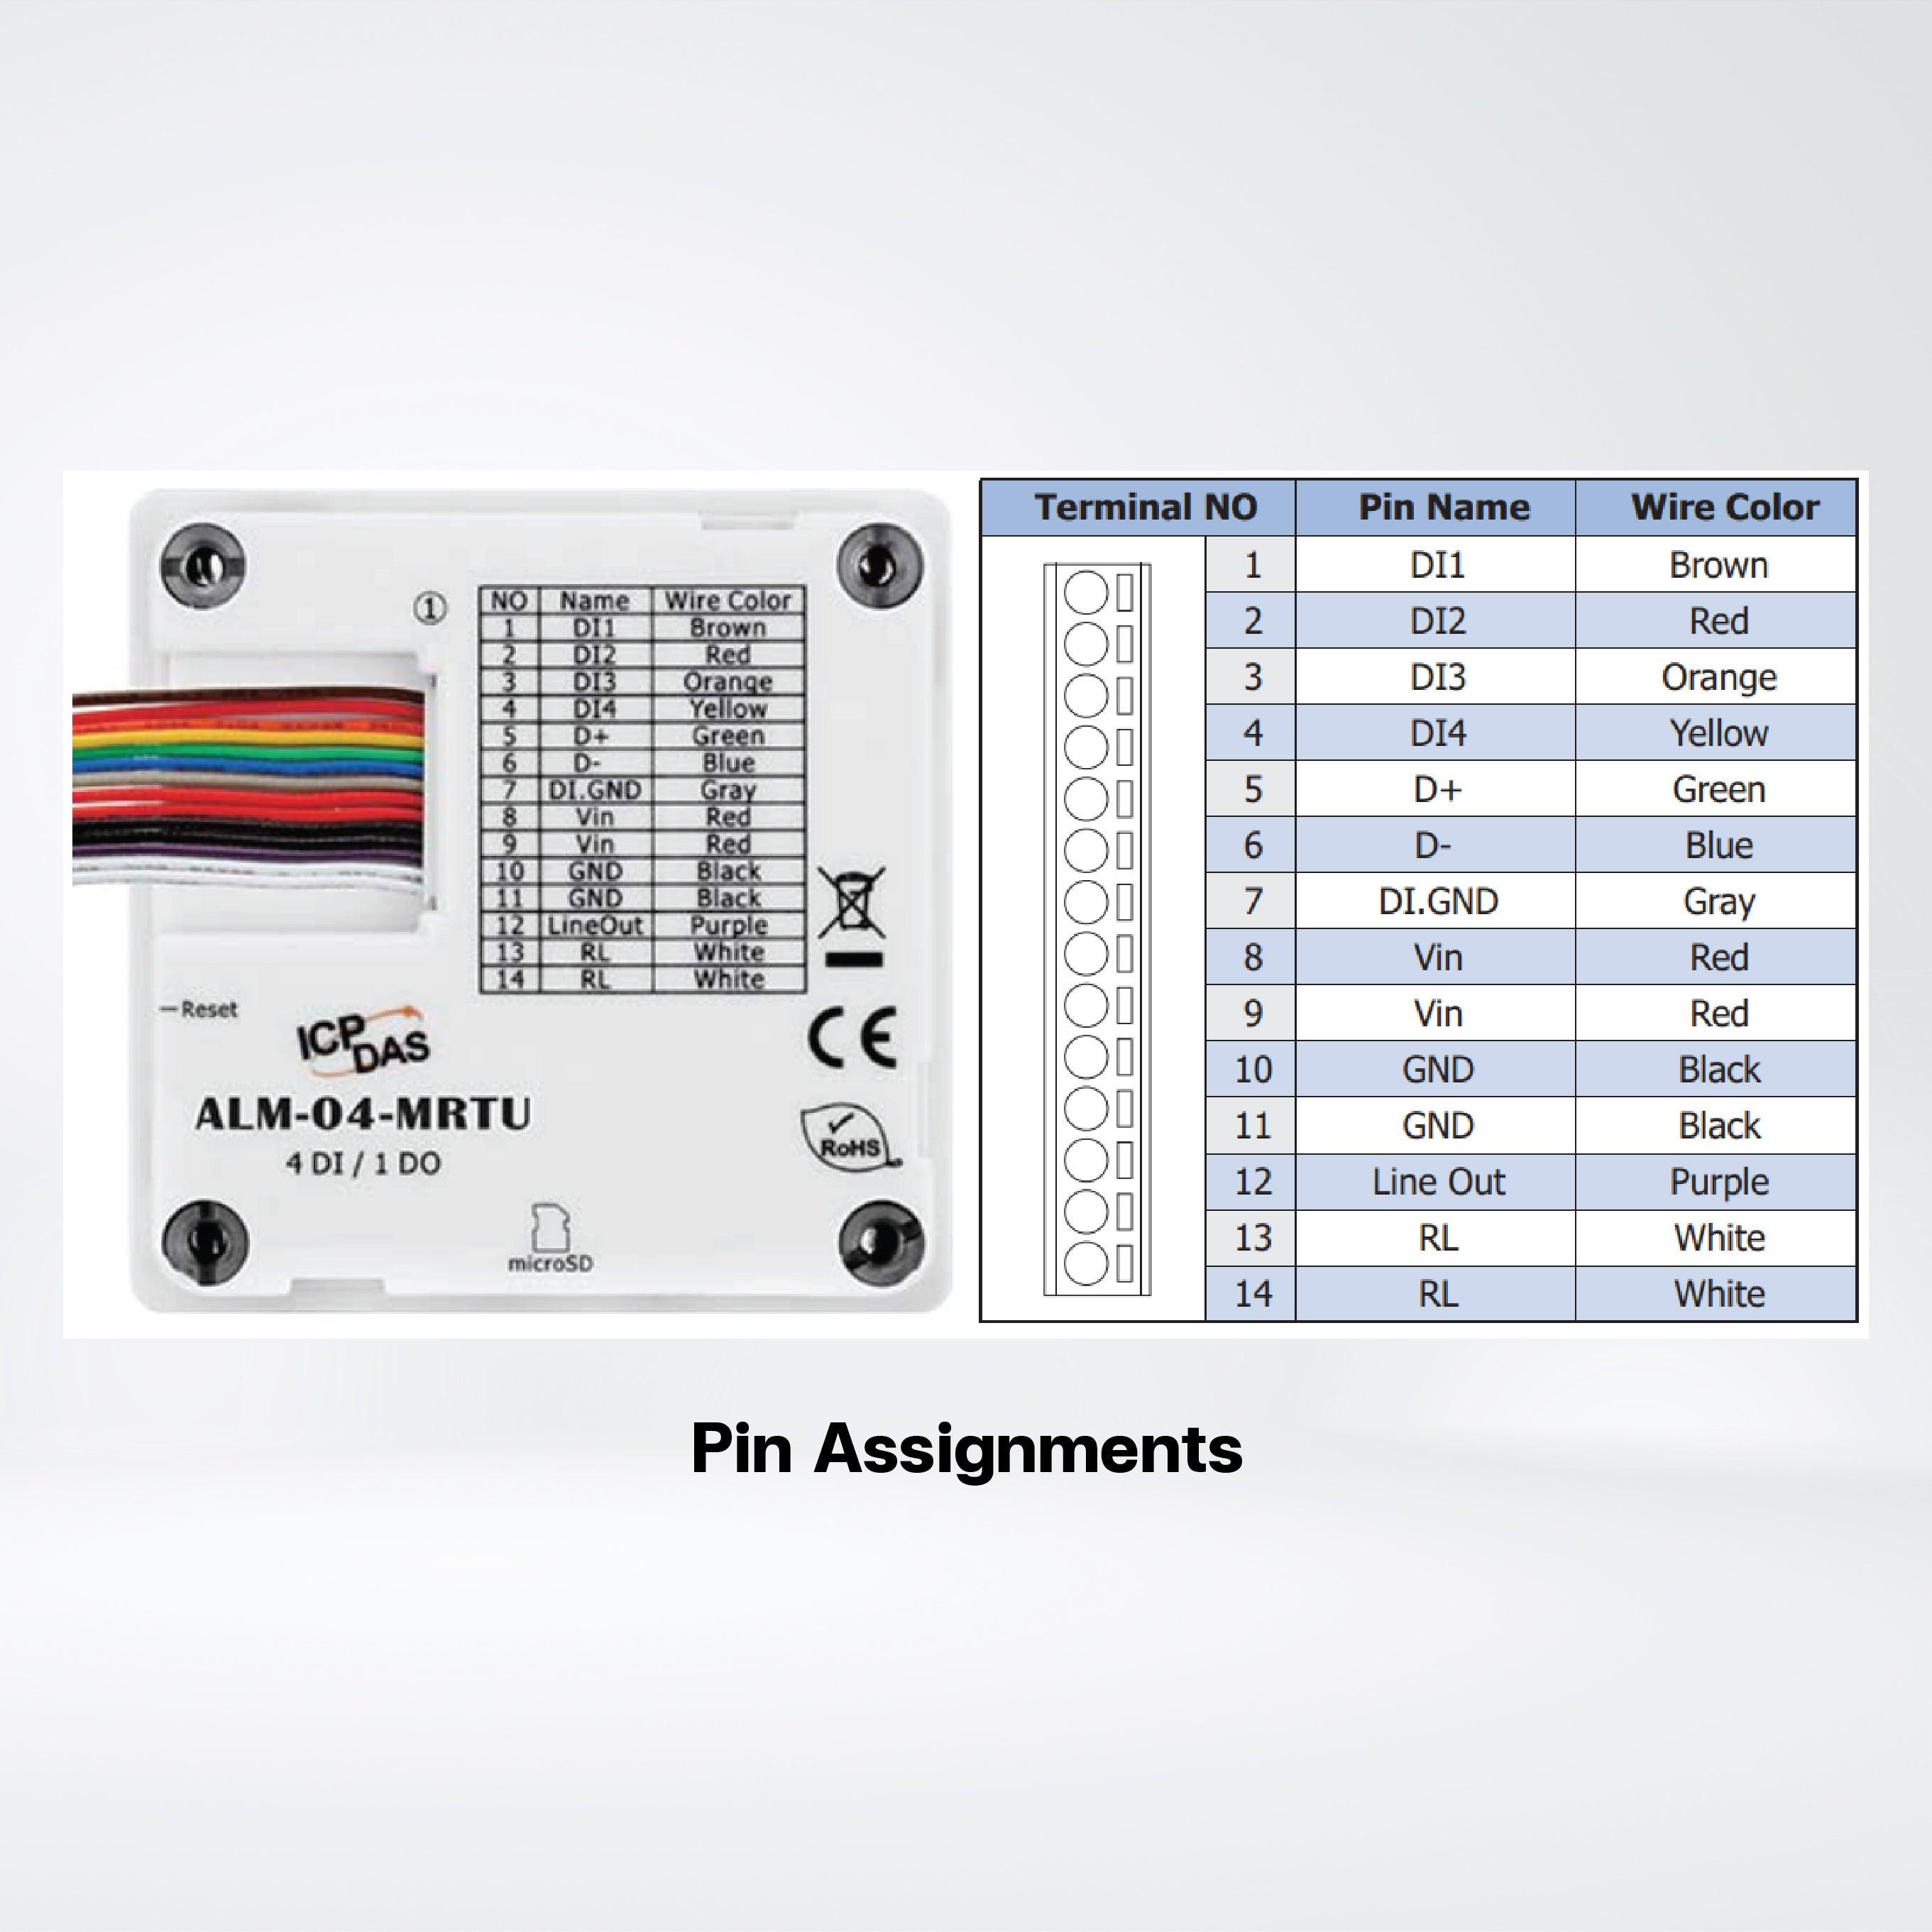 ALM-04-MRTU MP3 Alert module with RS-485 connection, 4-ch DI and 1-ch Relay Output - Riverplus